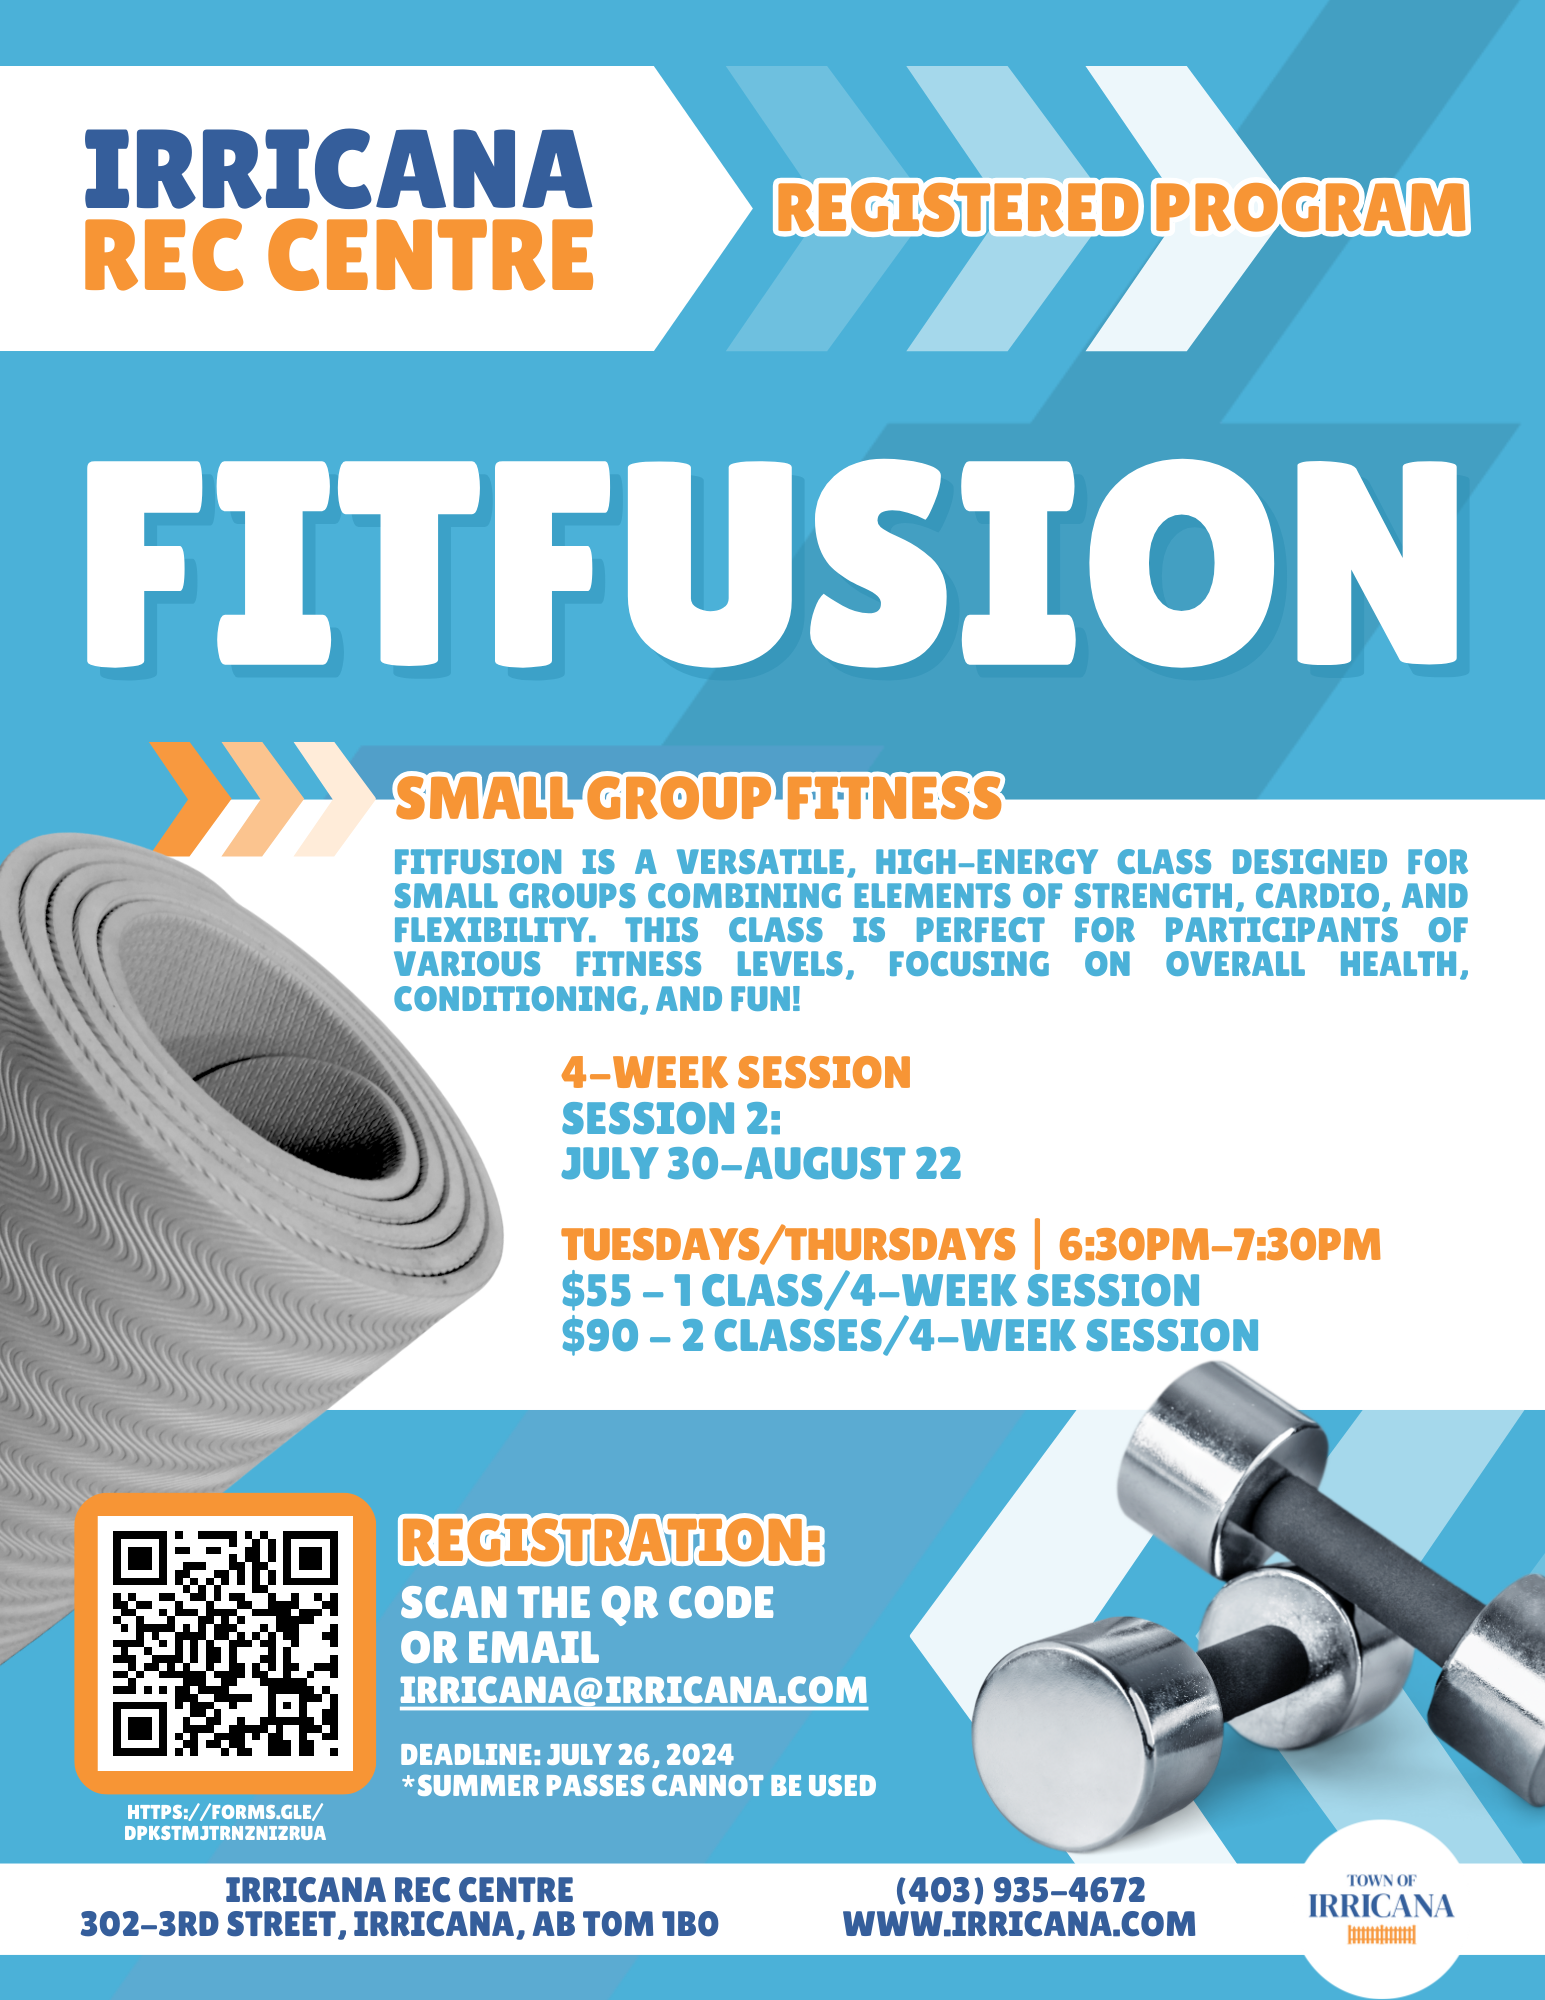 FitFusion Small Group Fitness at the Irricana Rec Centre in August, 2024